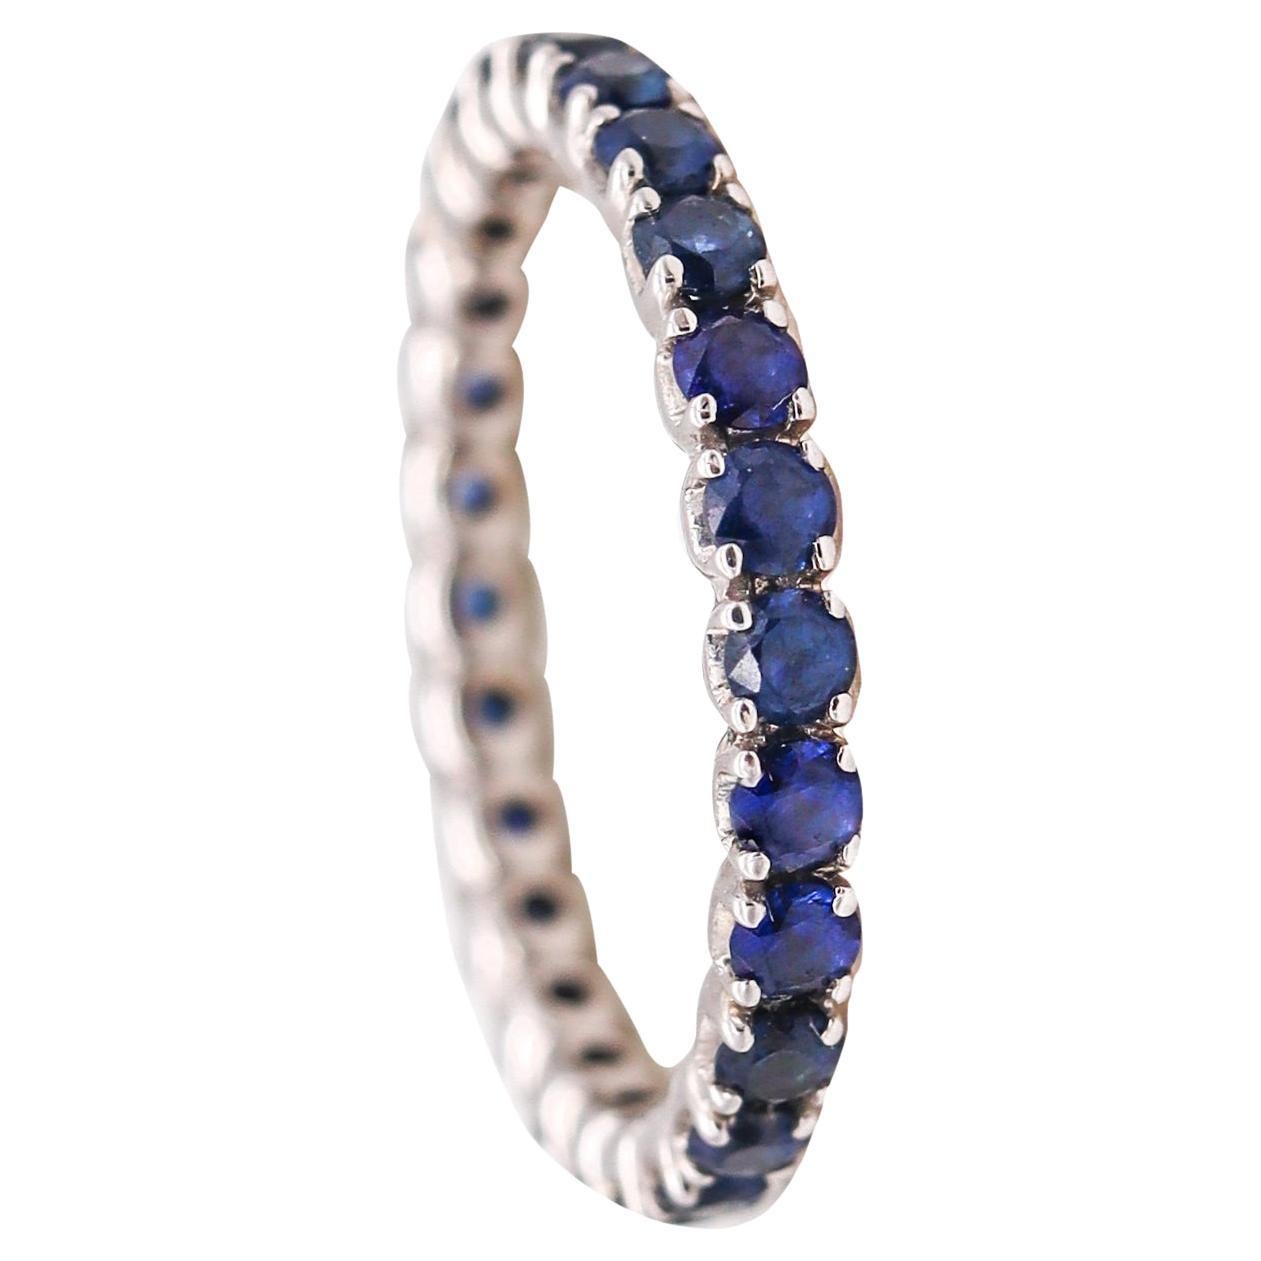 Eternity Ring Band in 18Kt White Gold with 1.25 Carats in Ceylon Blue Sapphires